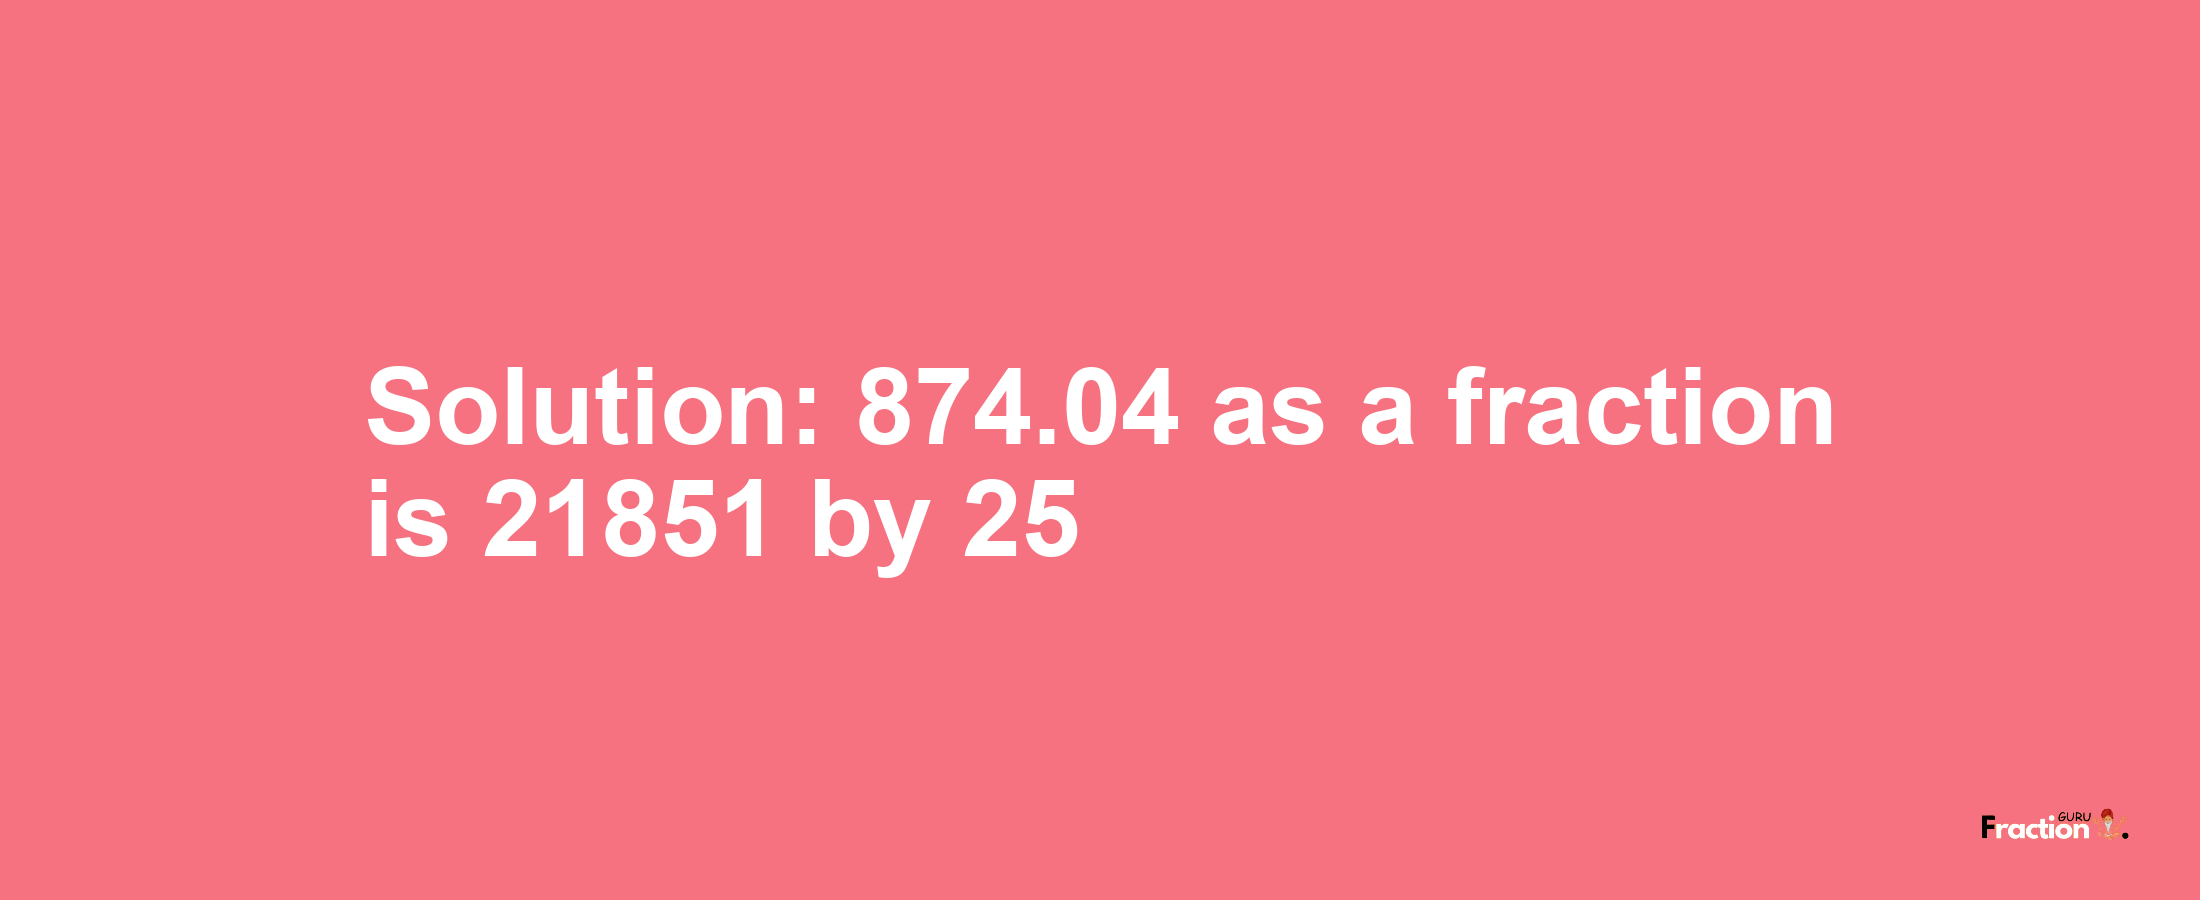 Solution:874.04 as a fraction is 21851/25